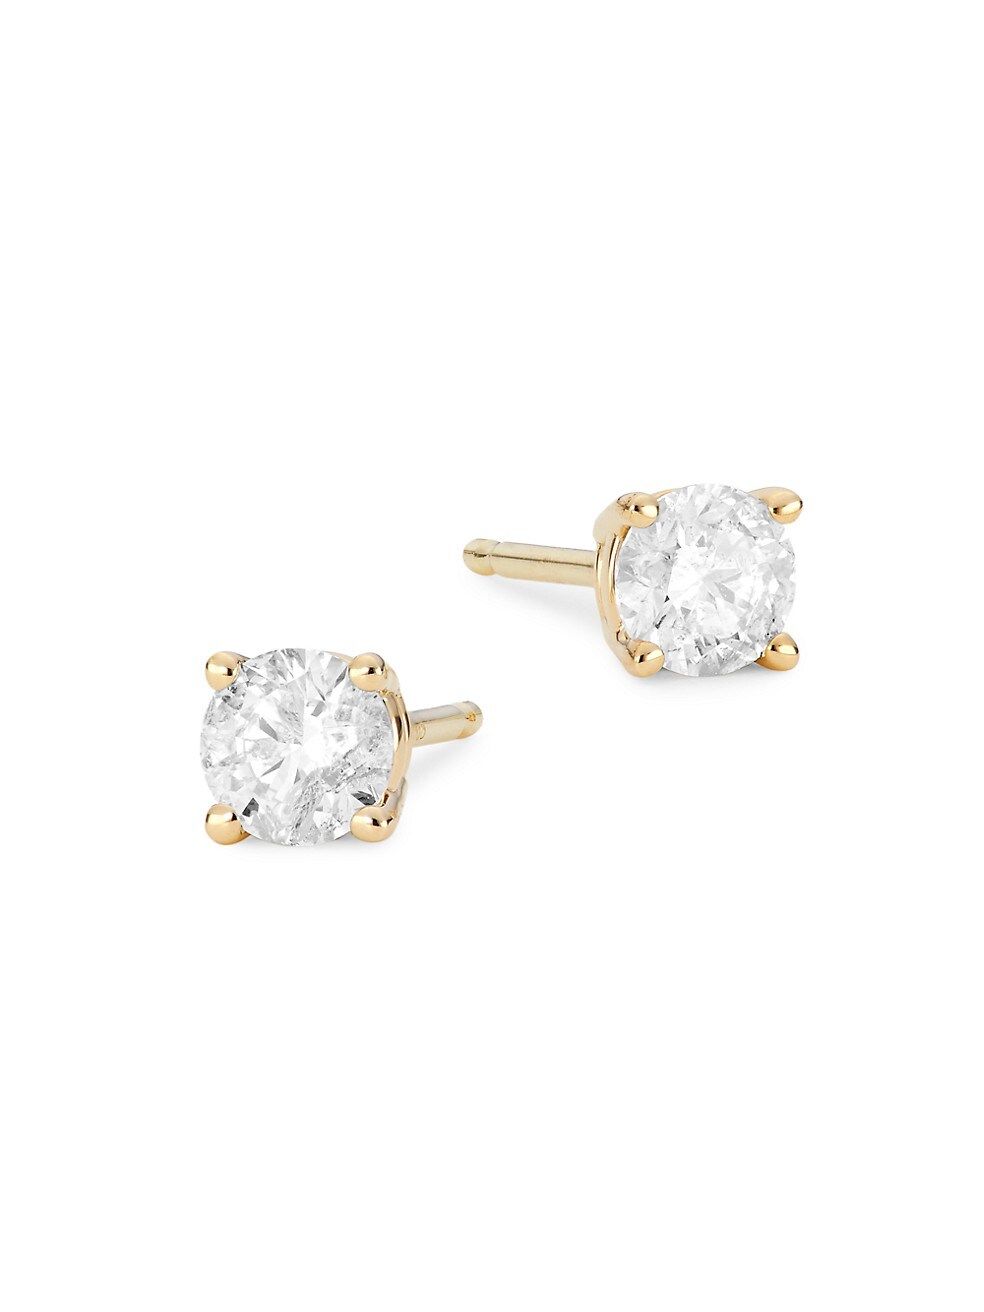 Saks Fifth Avenue Collection 14K Yellow Gold &amp; 0.5 TCW Round Diamond Stud Earrings | Saks Fifth Avenue